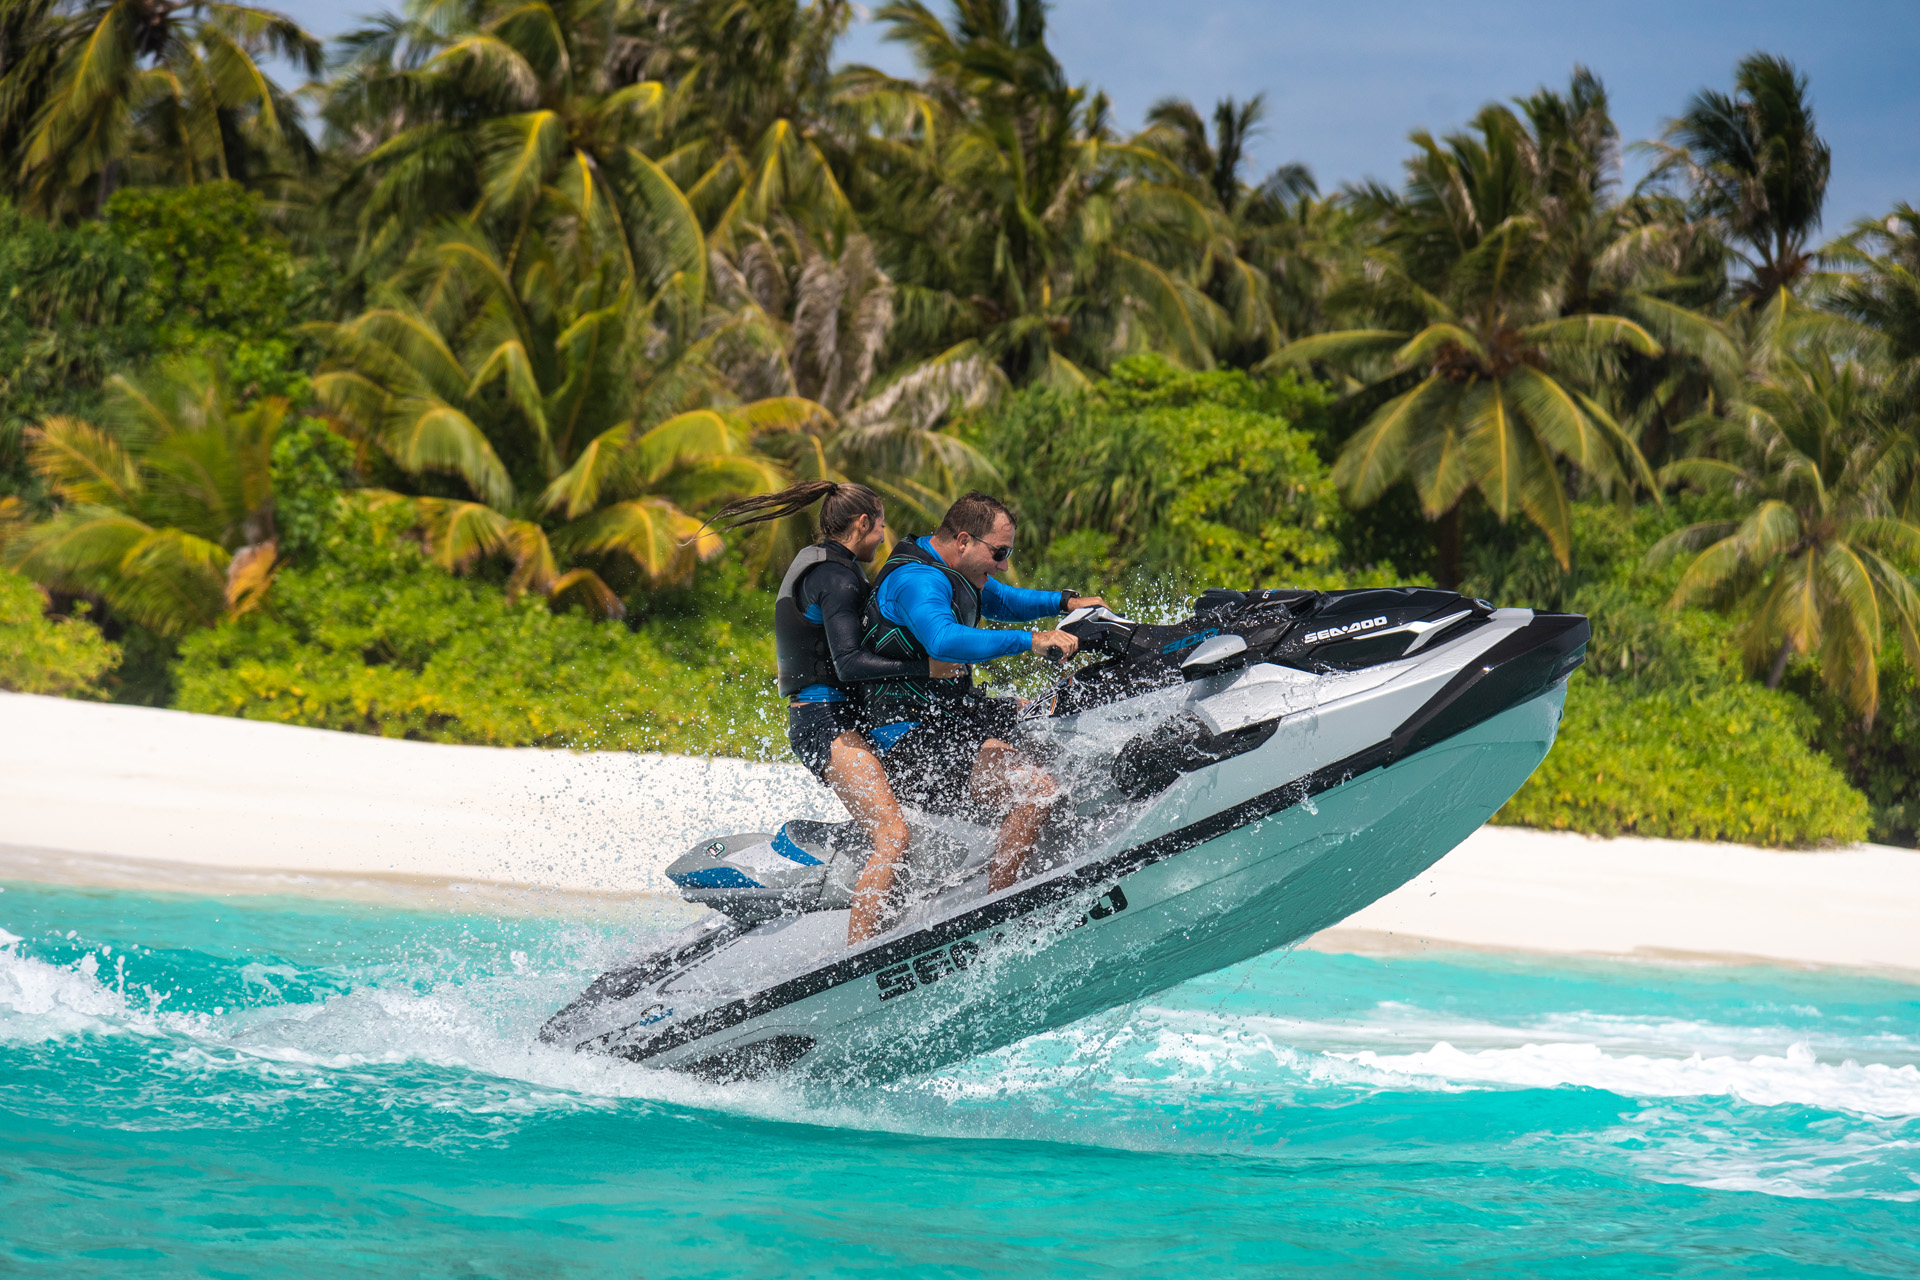 parent and child jet skiing